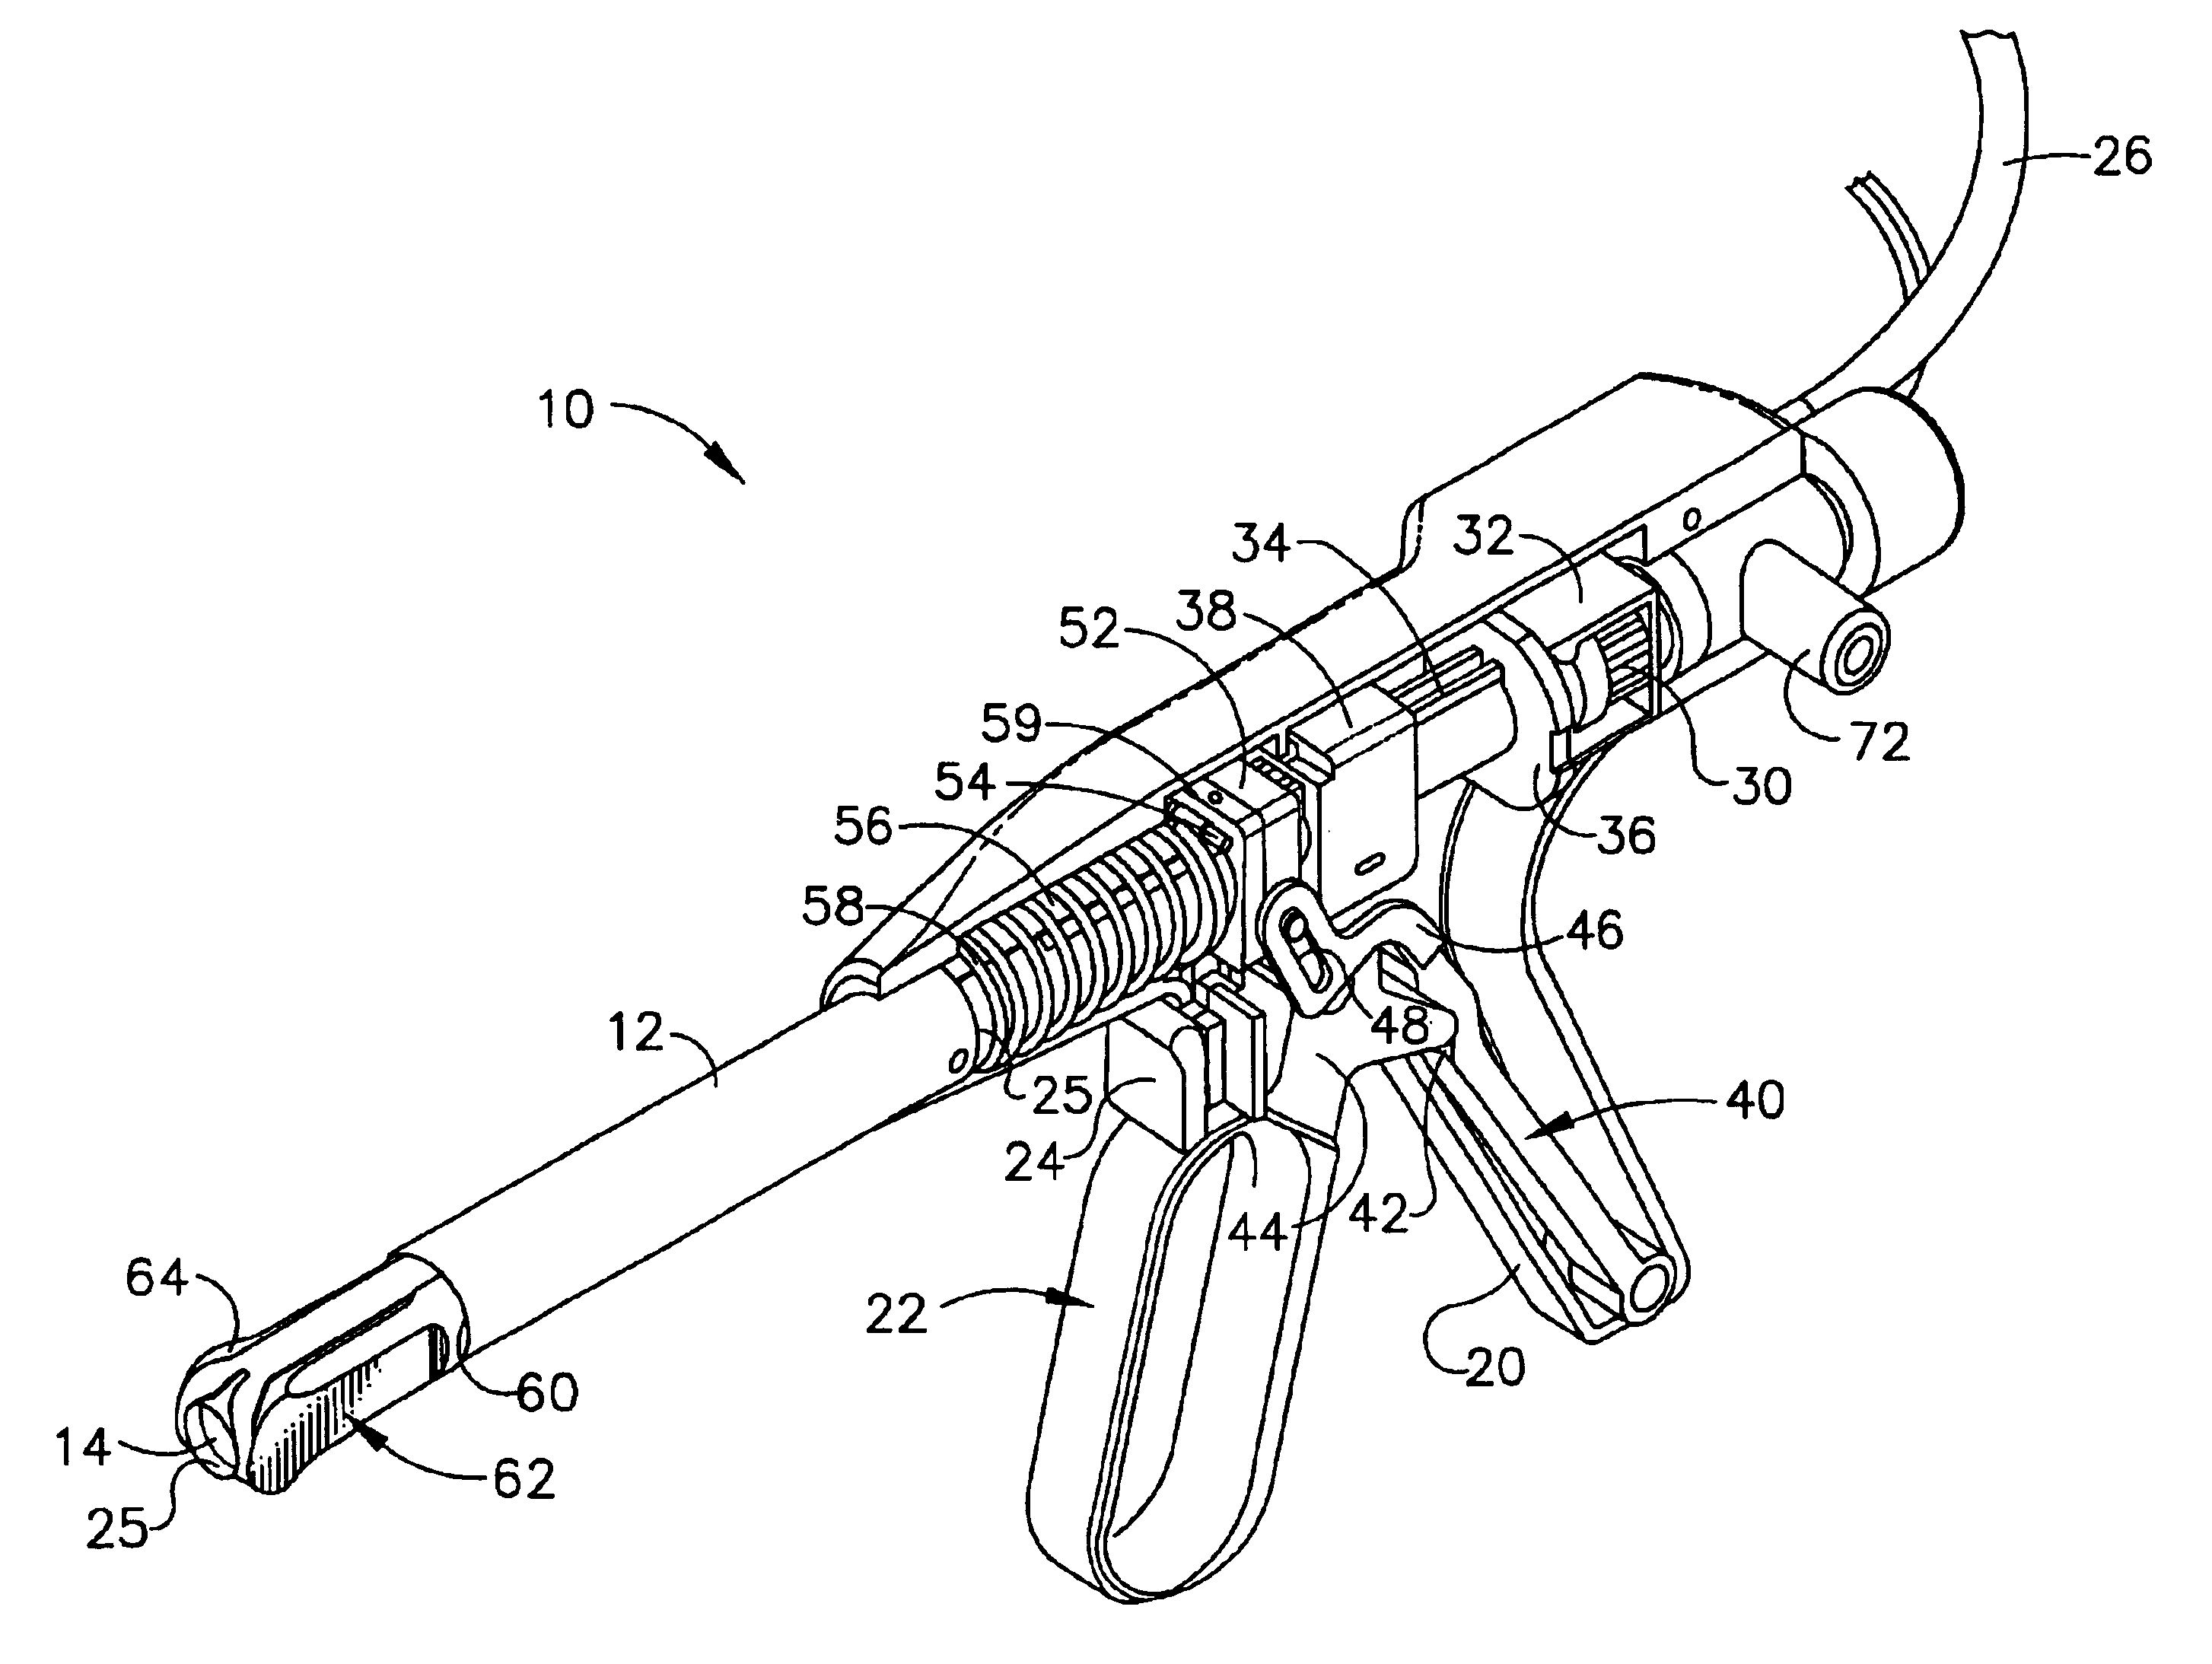 Methods and devices for collection of soft tissue